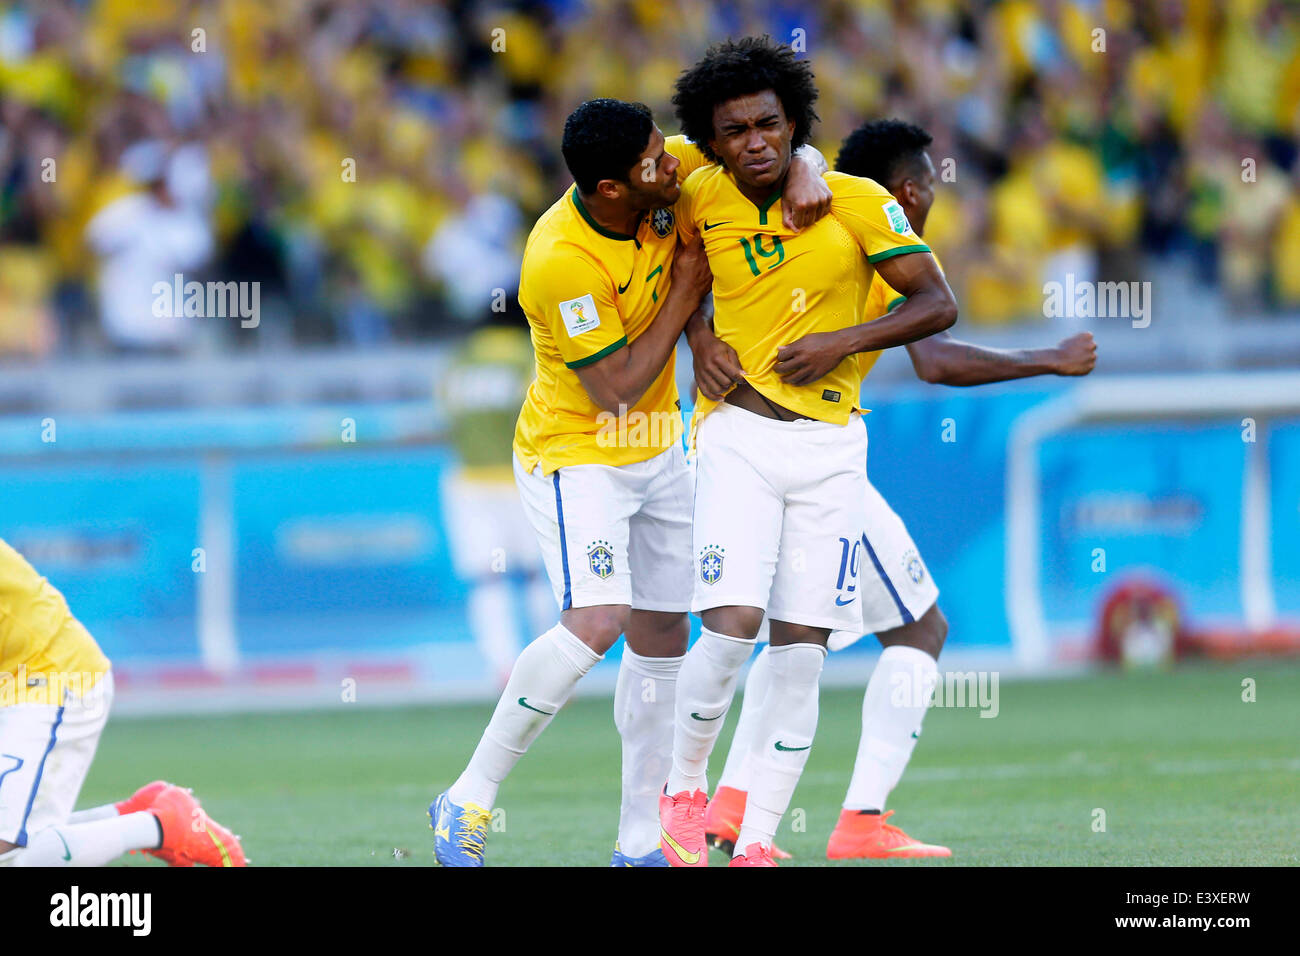 Belo Horizonte, Brazil. © D. 28th June, 2014. (L-R) Hulk, Willian (BRA) Football/Soccer : Hulk and Willian of Brazil celebrate after winning the penalty shoot out during the FIFA World Cup Brazil 2014 Round of 16 match between Brazil 1(3-2)1 Chile at Estadio Mineirao in Belo Horizonte, Brazil. © D .Nakashima/AFLO/Alamy Live News Stock Photo